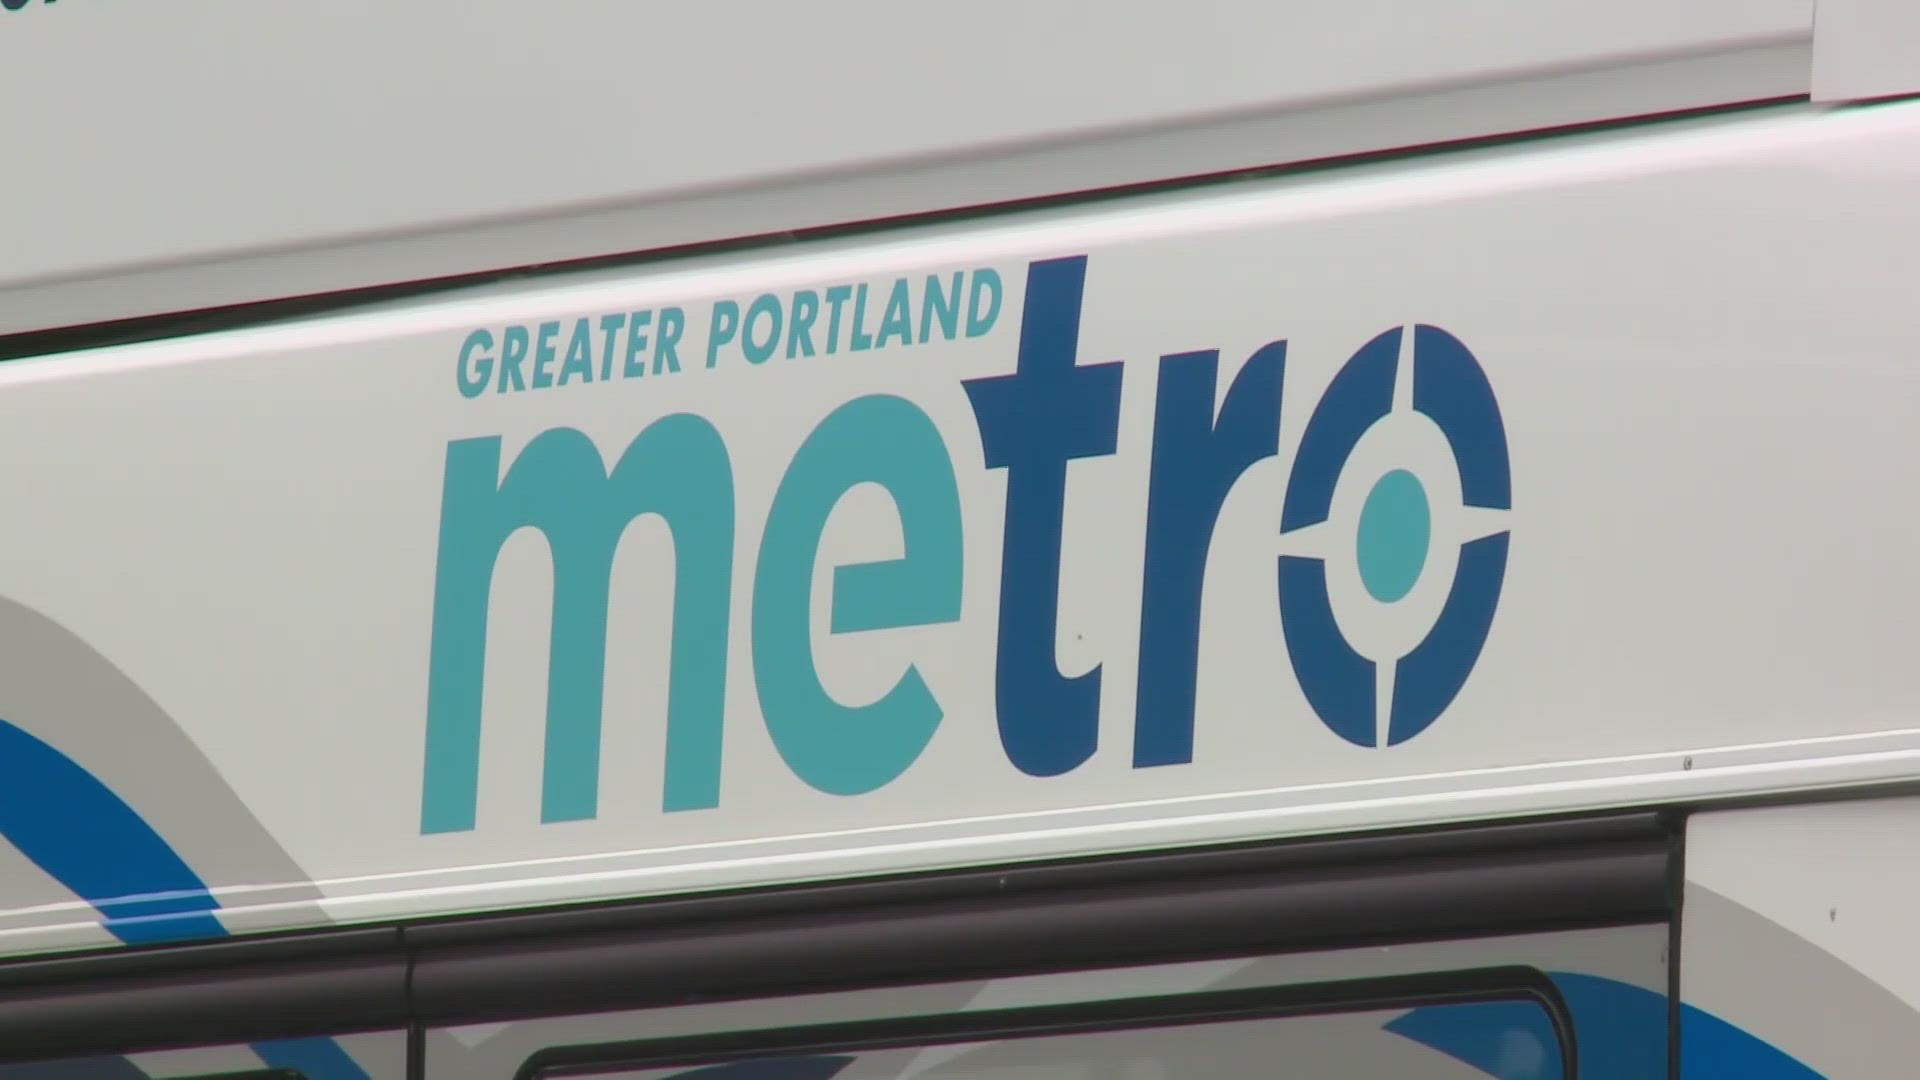 The Greater Portland Metro said is celebrating the launch of four new buses on the Breez Express Route running between Portland, Yarmouth, Freeport, and Brunswick.